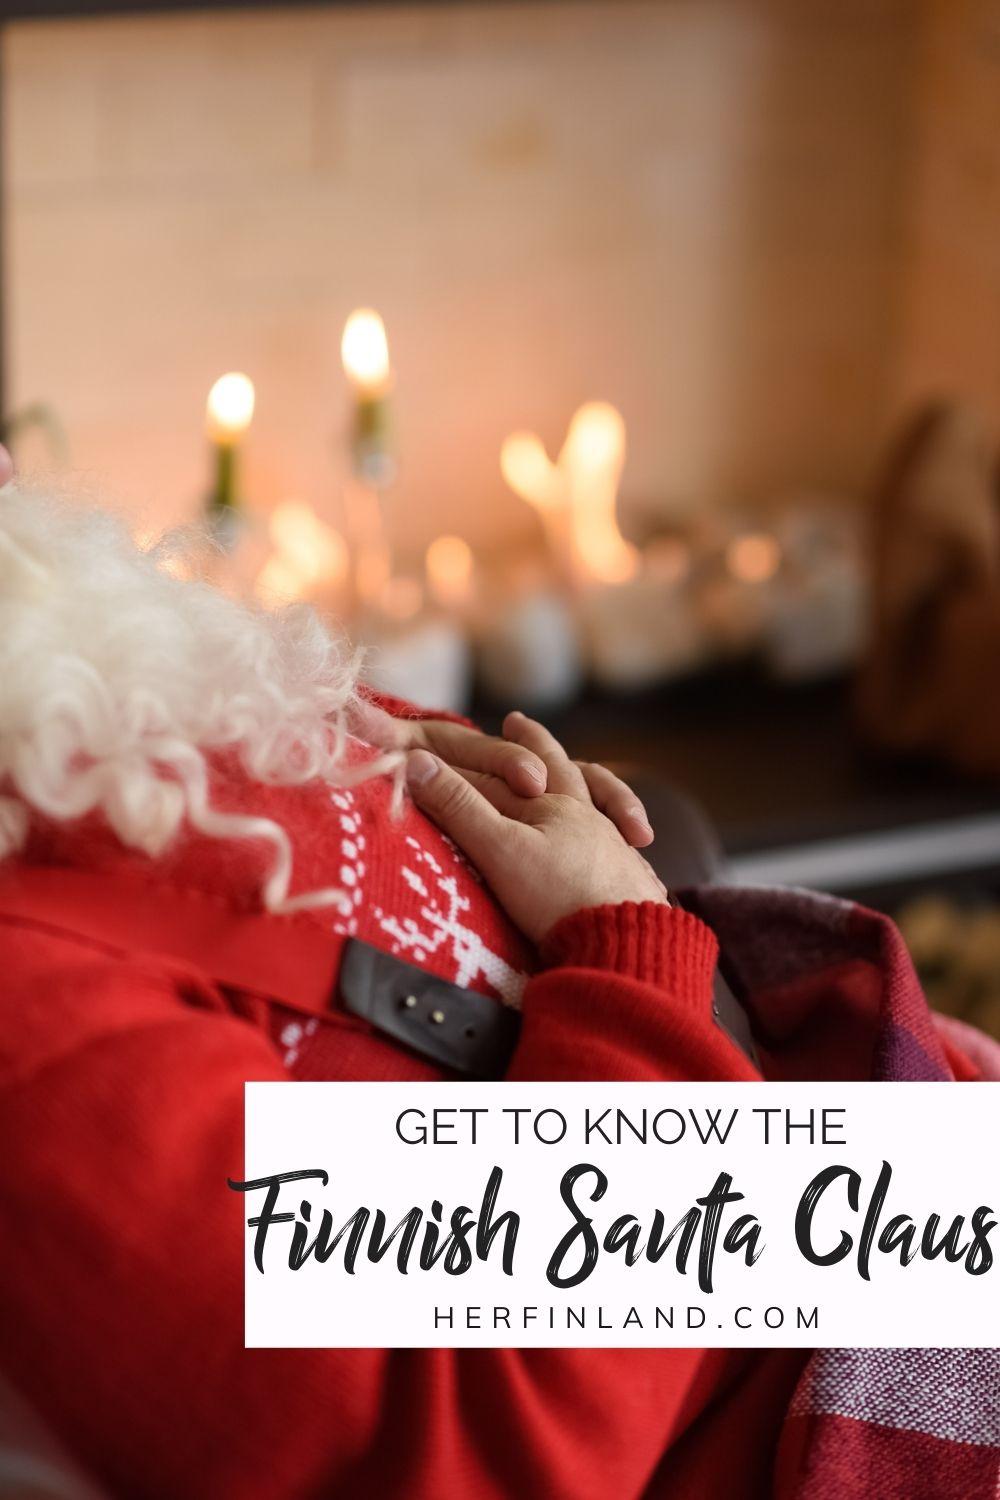 Facts about Finnish Santa